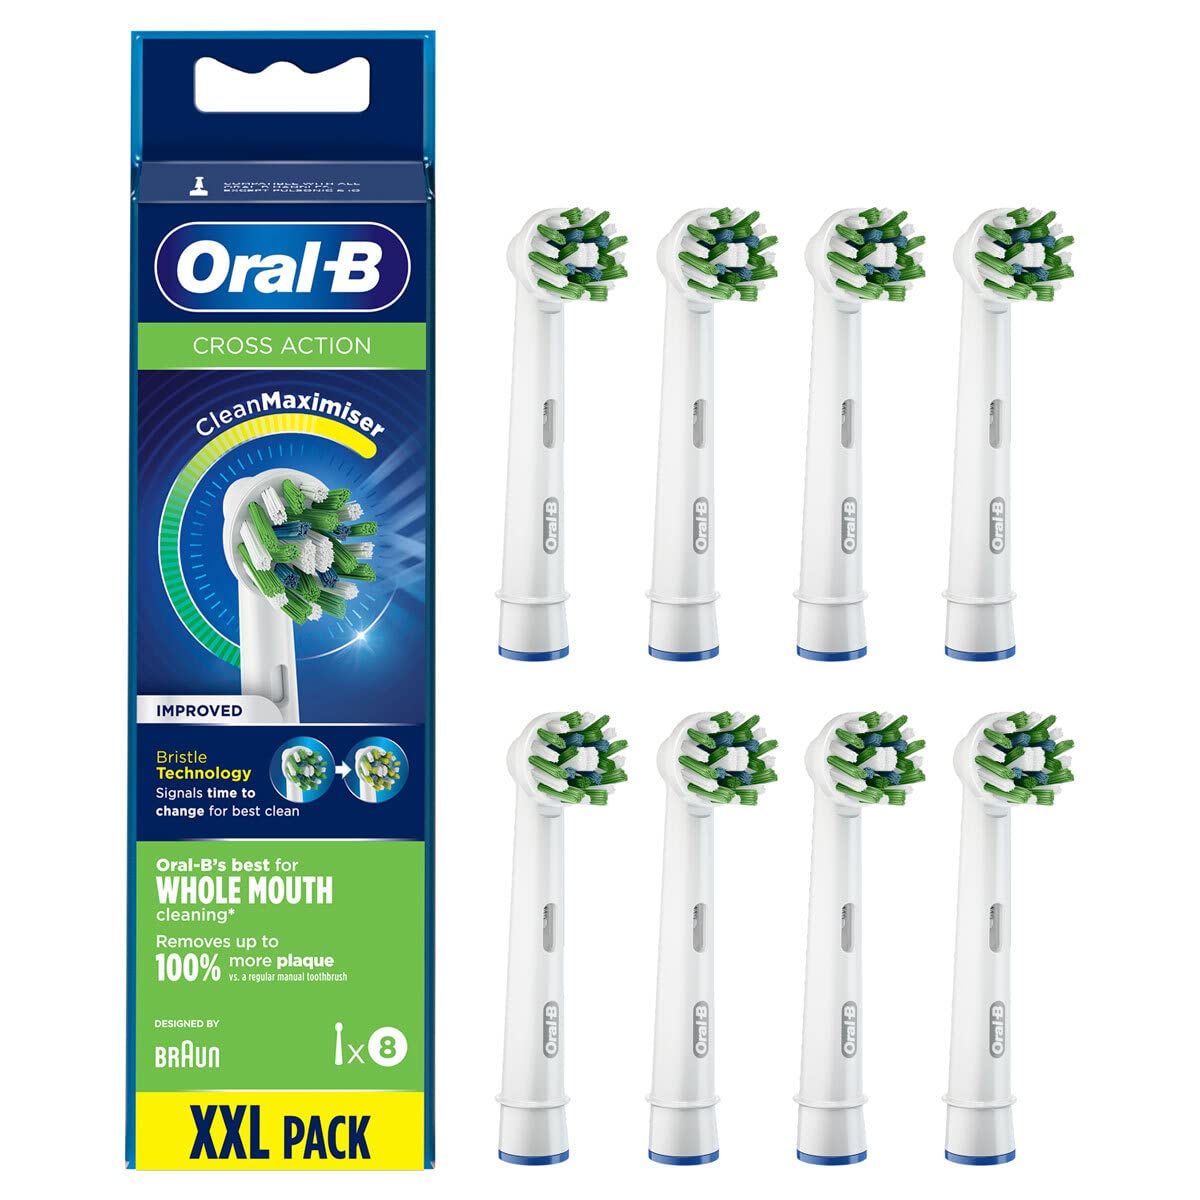 Oral-B CrossAction Brush Heads - Pack of 8 $21.83 @ Amazon